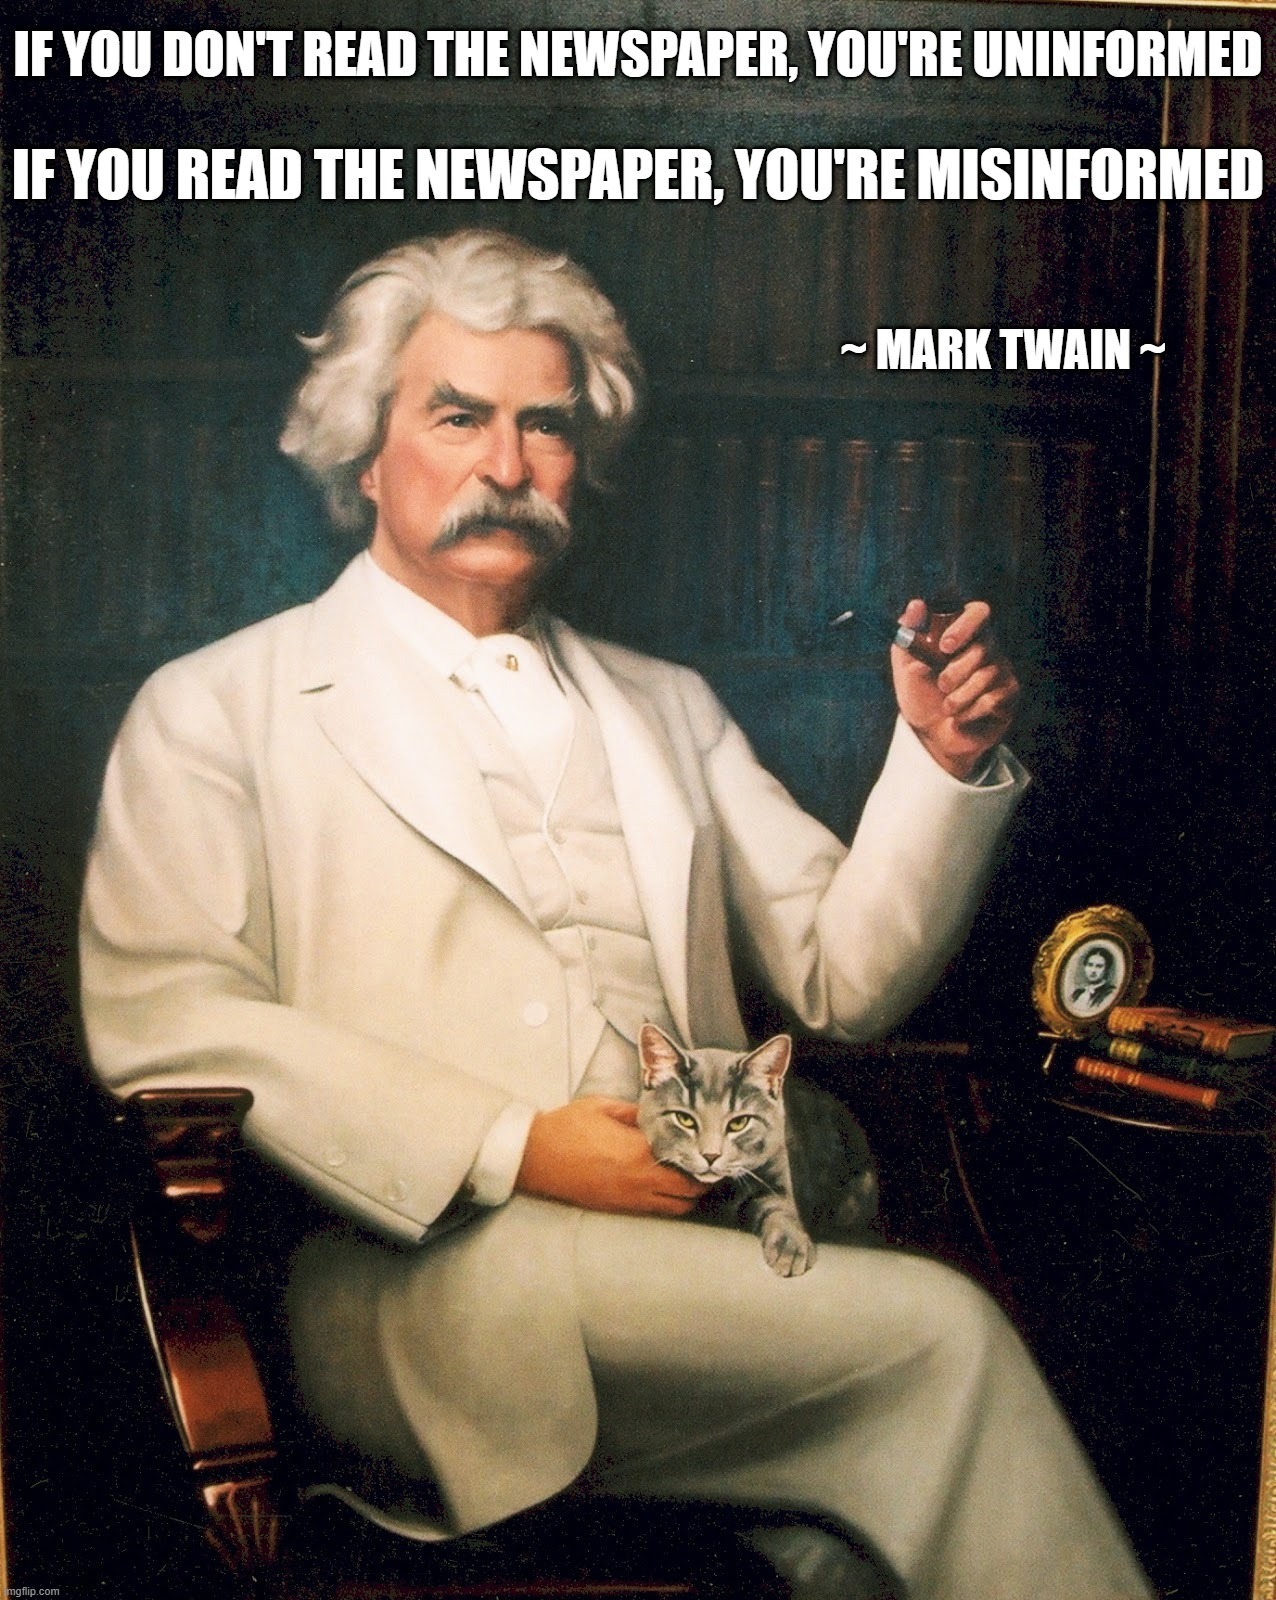 I guess things haven't changed that much in the last hundred plus years after all. | IF YOU DON'T READ THE NEWSPAPER, YOU'RE UNINFORMED; IF YOU READ THE NEWSPAPER, YOU'RE MISINFORMED; ~ MARK TWAIN ~ | image tagged in fake news,cnn fake news,liberal media | made w/ Imgflip meme maker